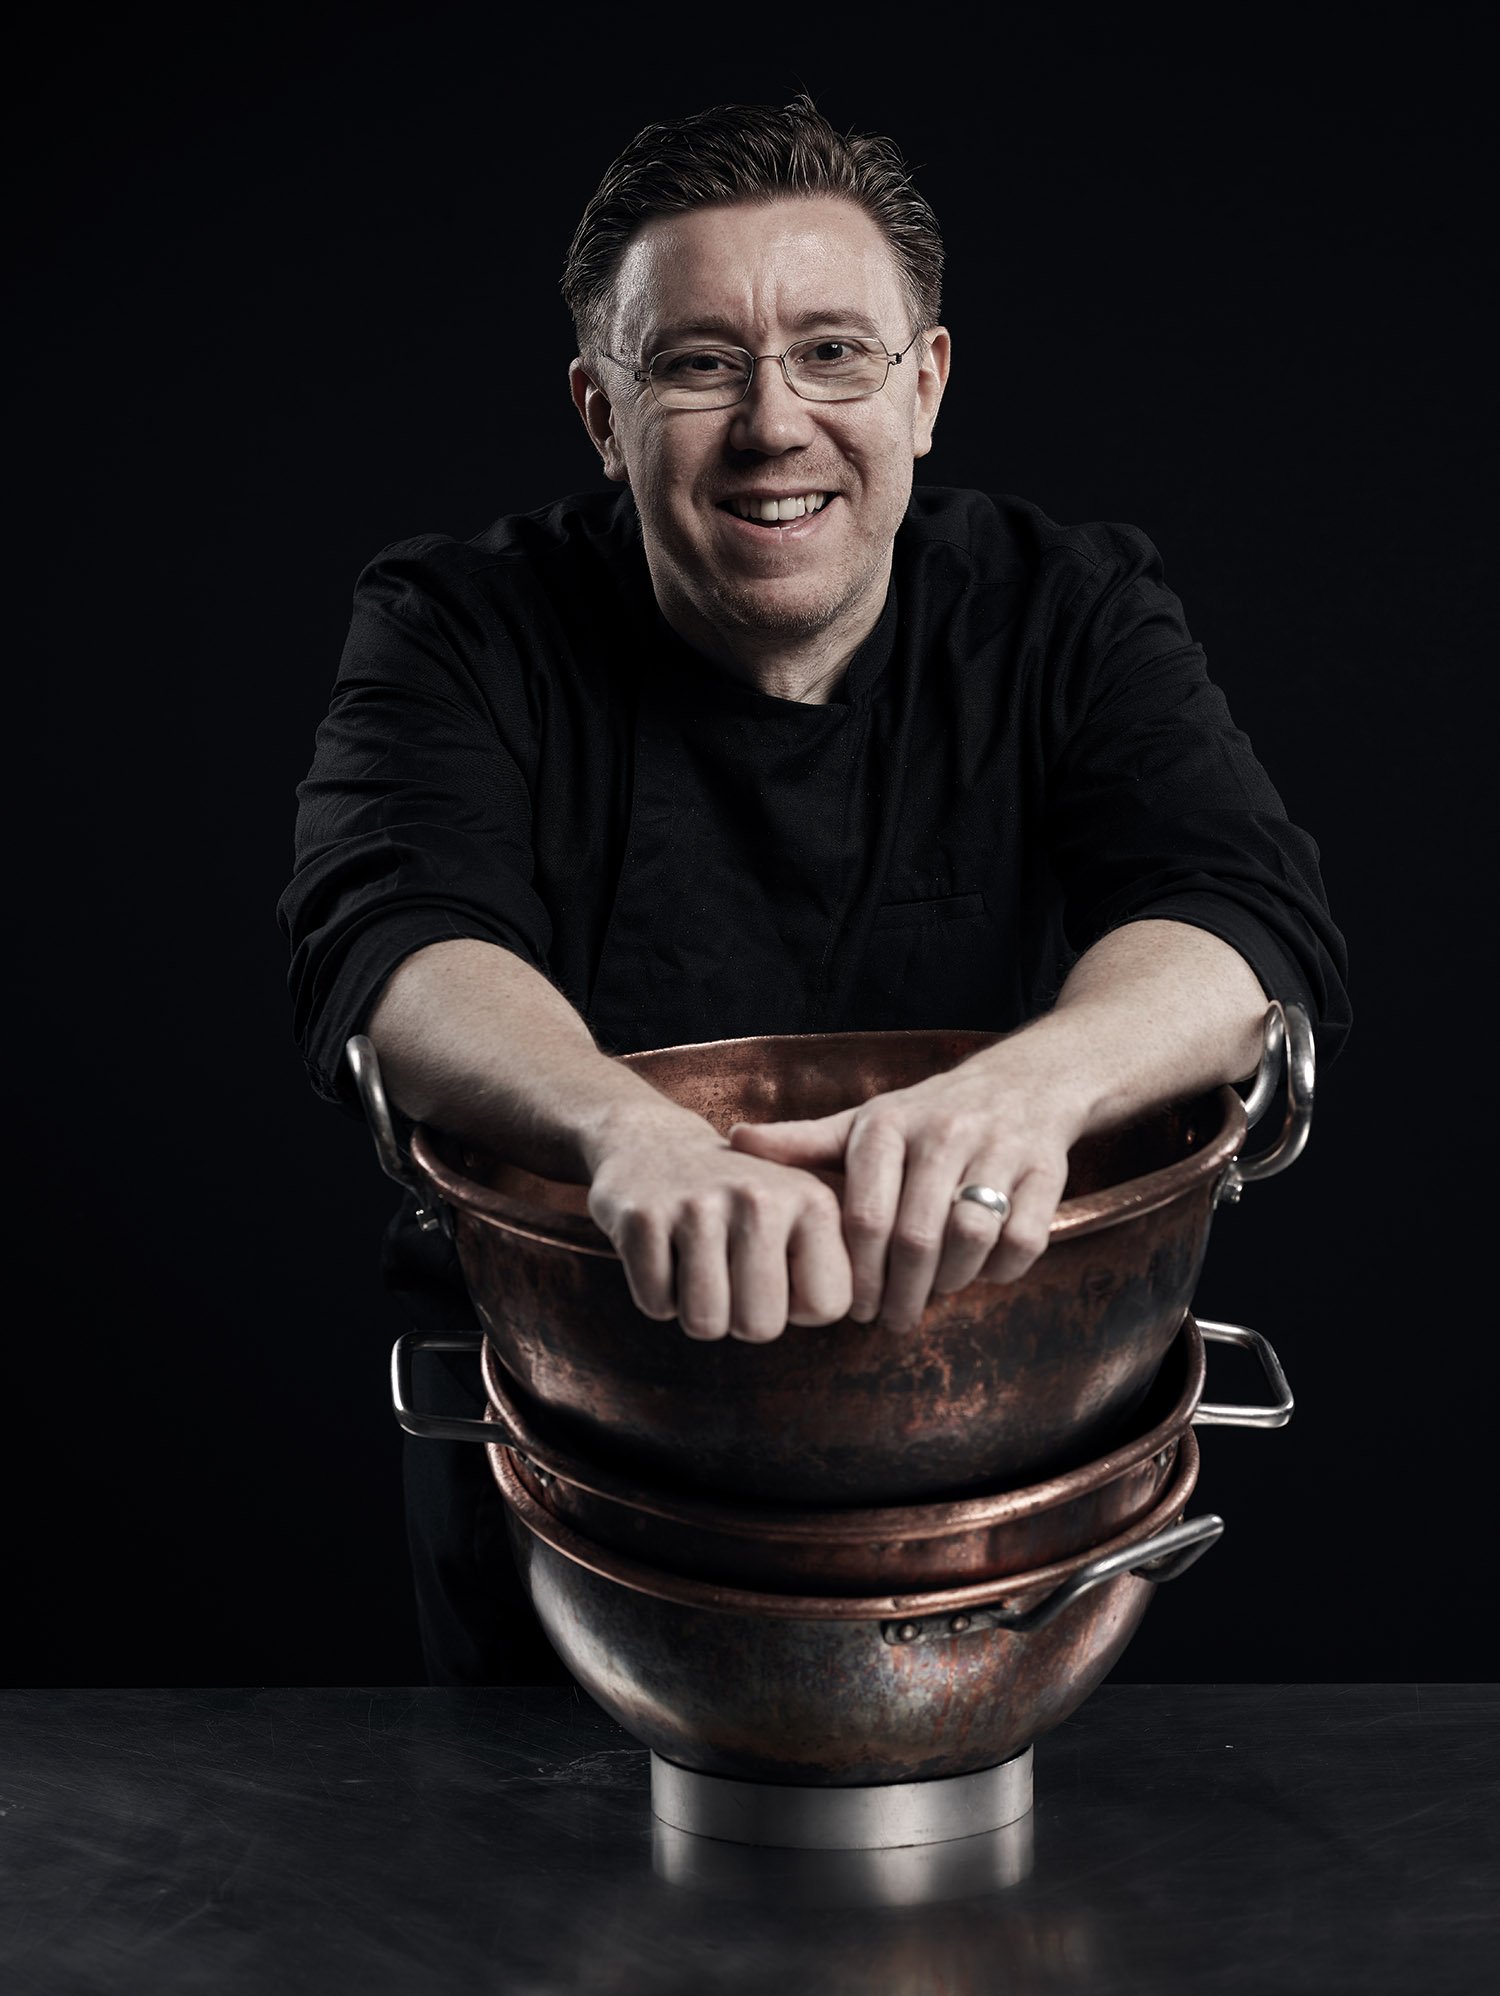 Thomas Müller Chocolatier - find out more about the Chocolatier from Schaffhausen.